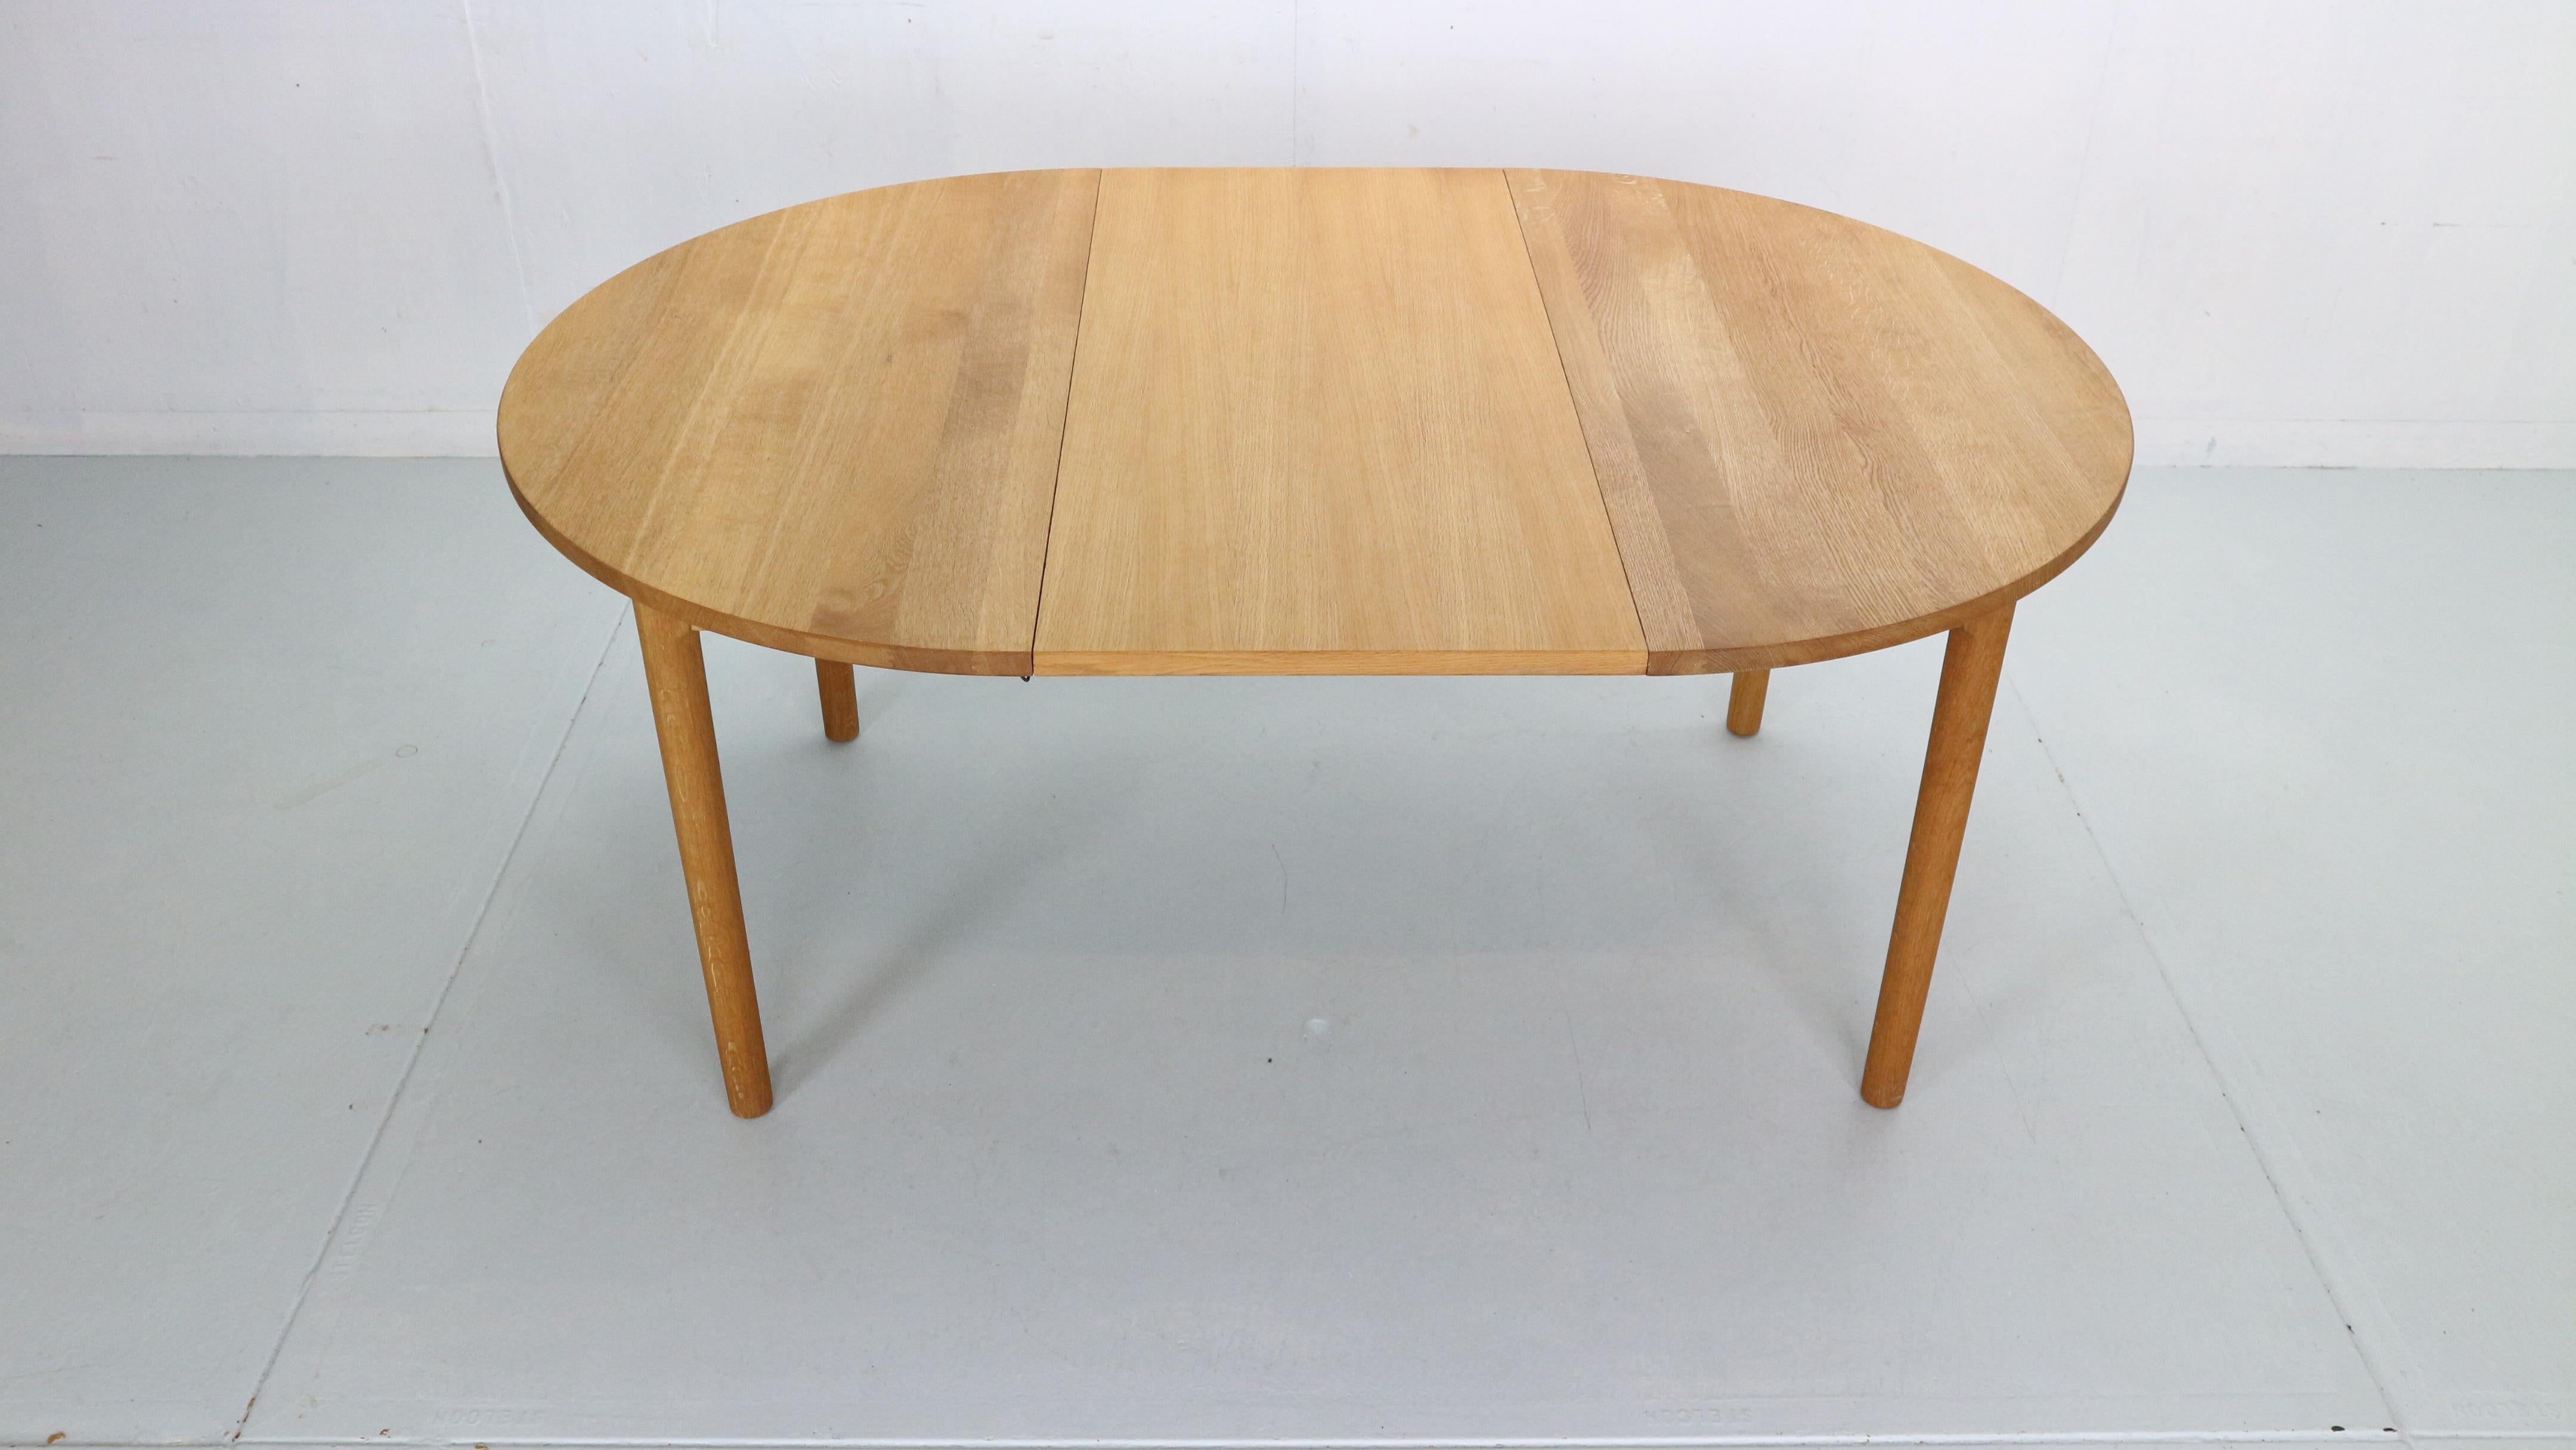 Scandinavian modern period dining table designed by hans j. Wegner and manufactured for ry mobler in 1970s period, denmark. Made of oak wood. Round dinning table has an extension leave. Extended from 114cm to 164cm wide. The table is in a perfect